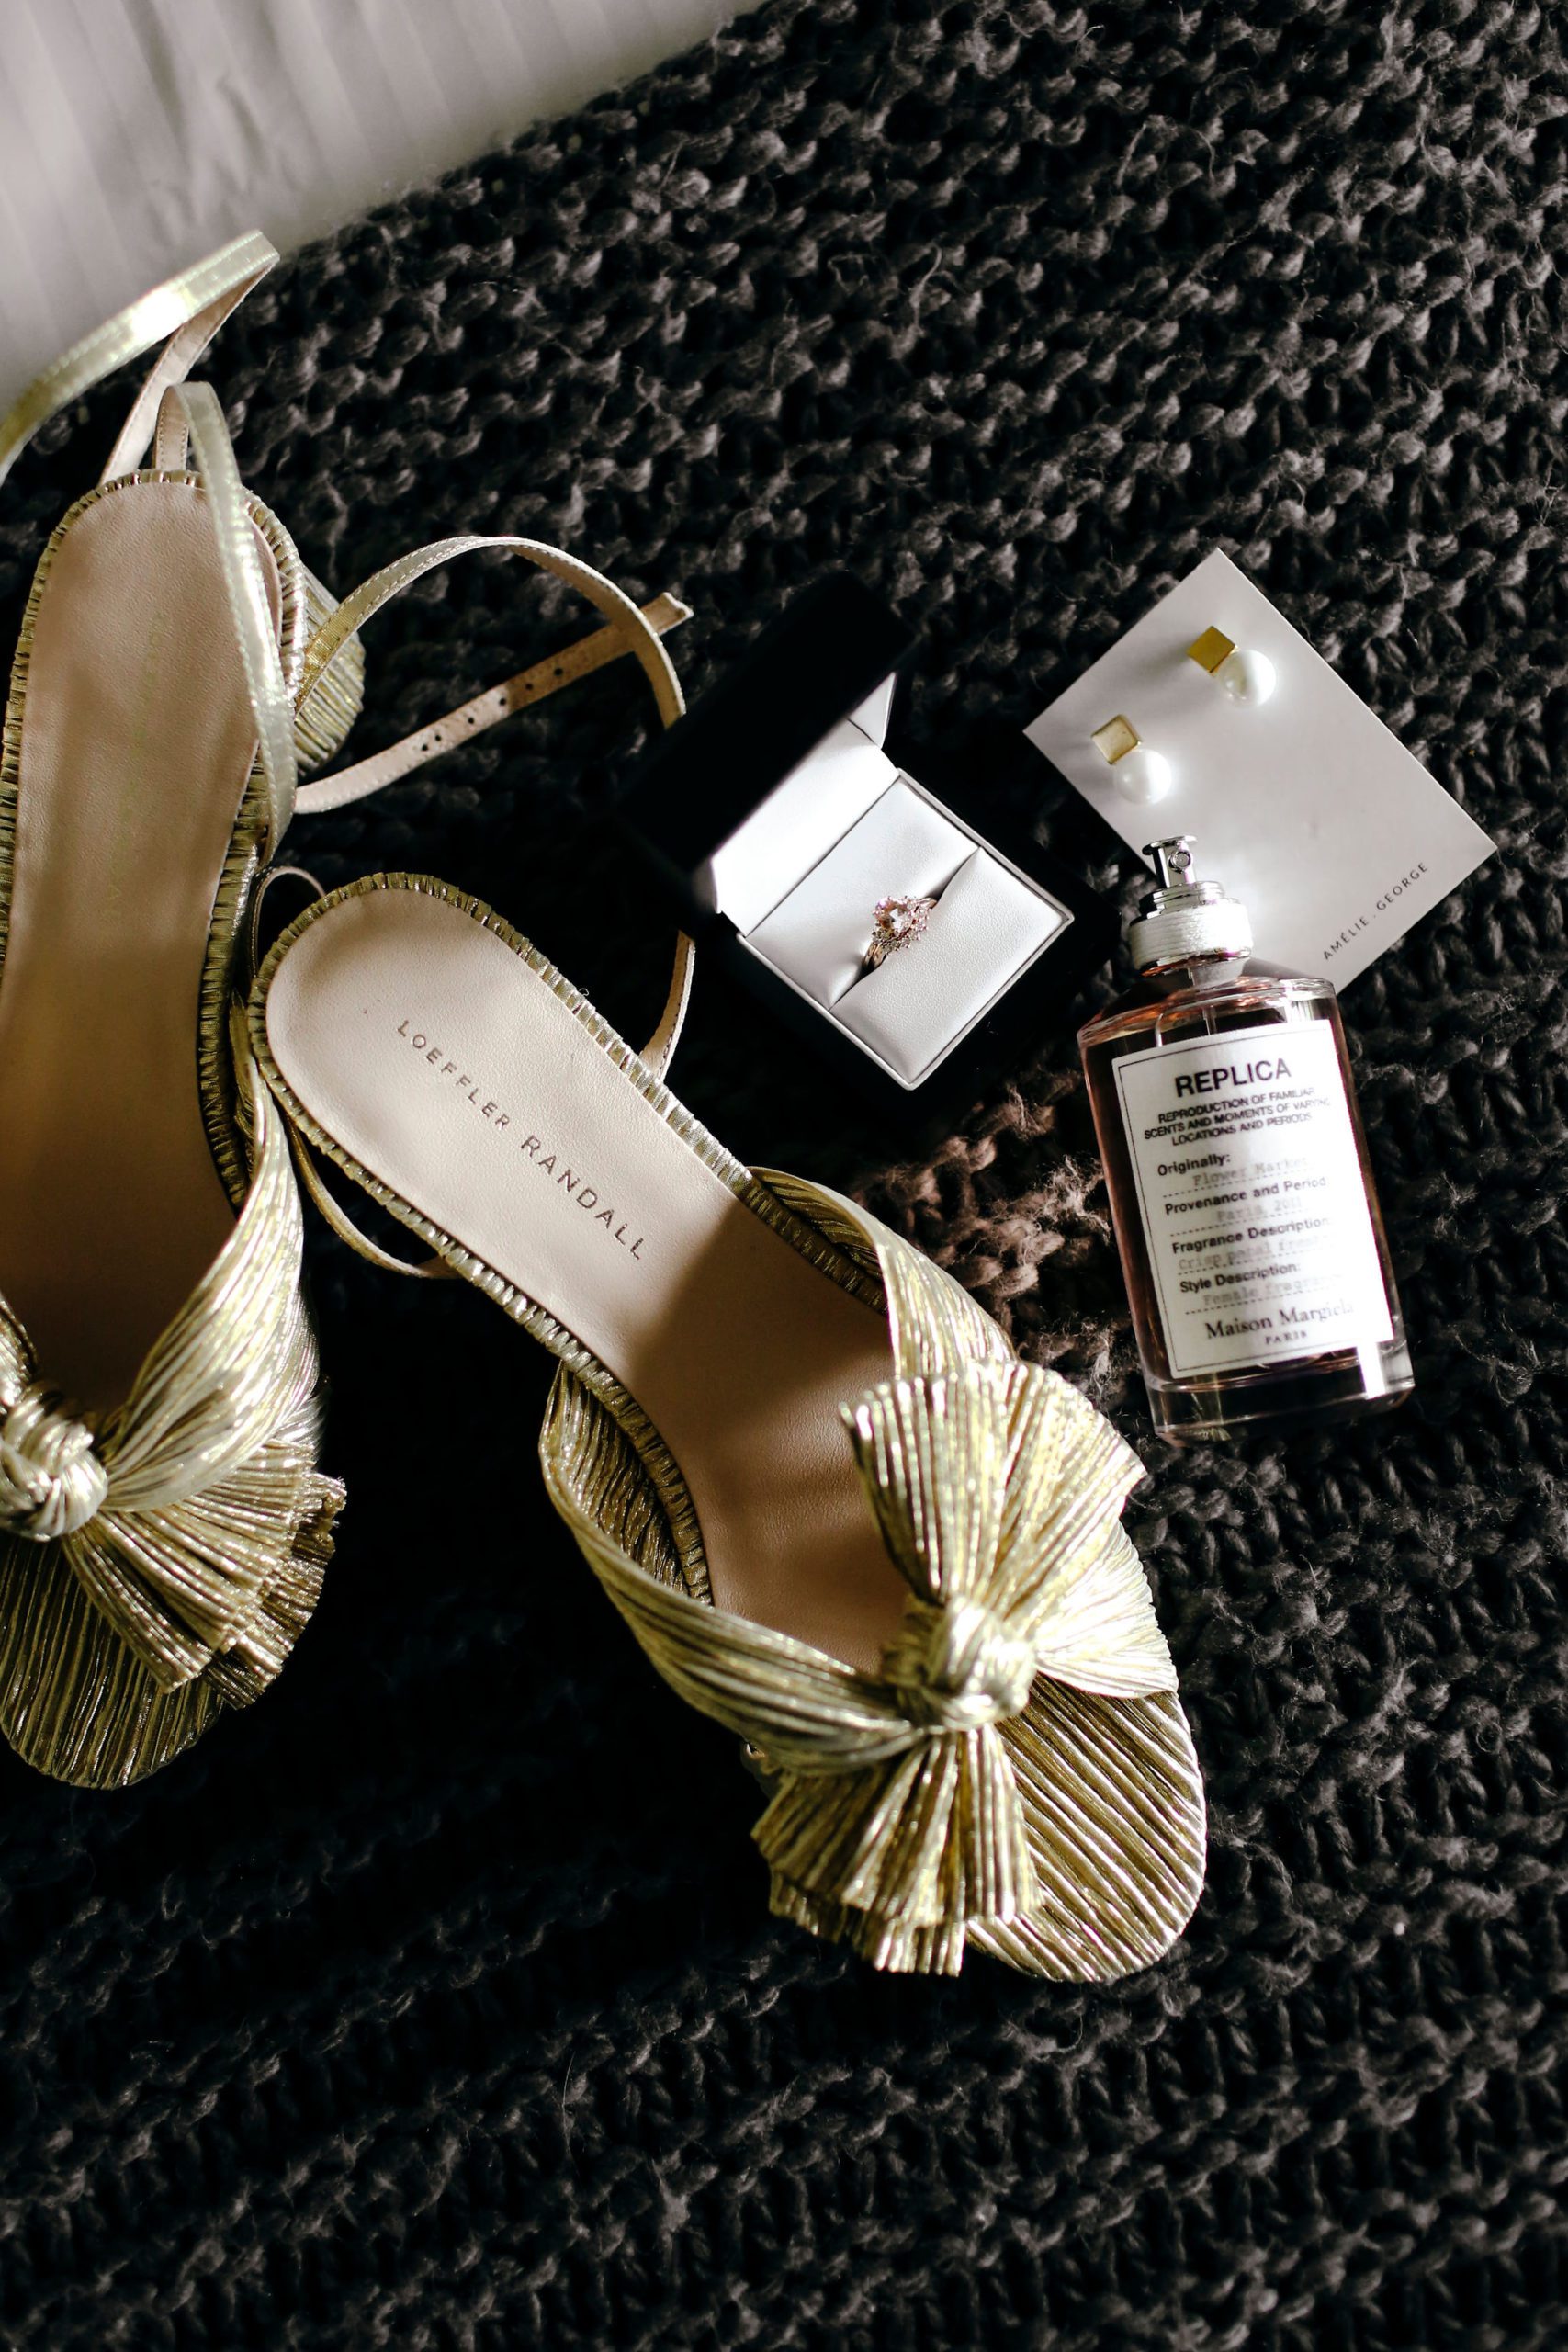 Wedding shoes, perfume and rings. 